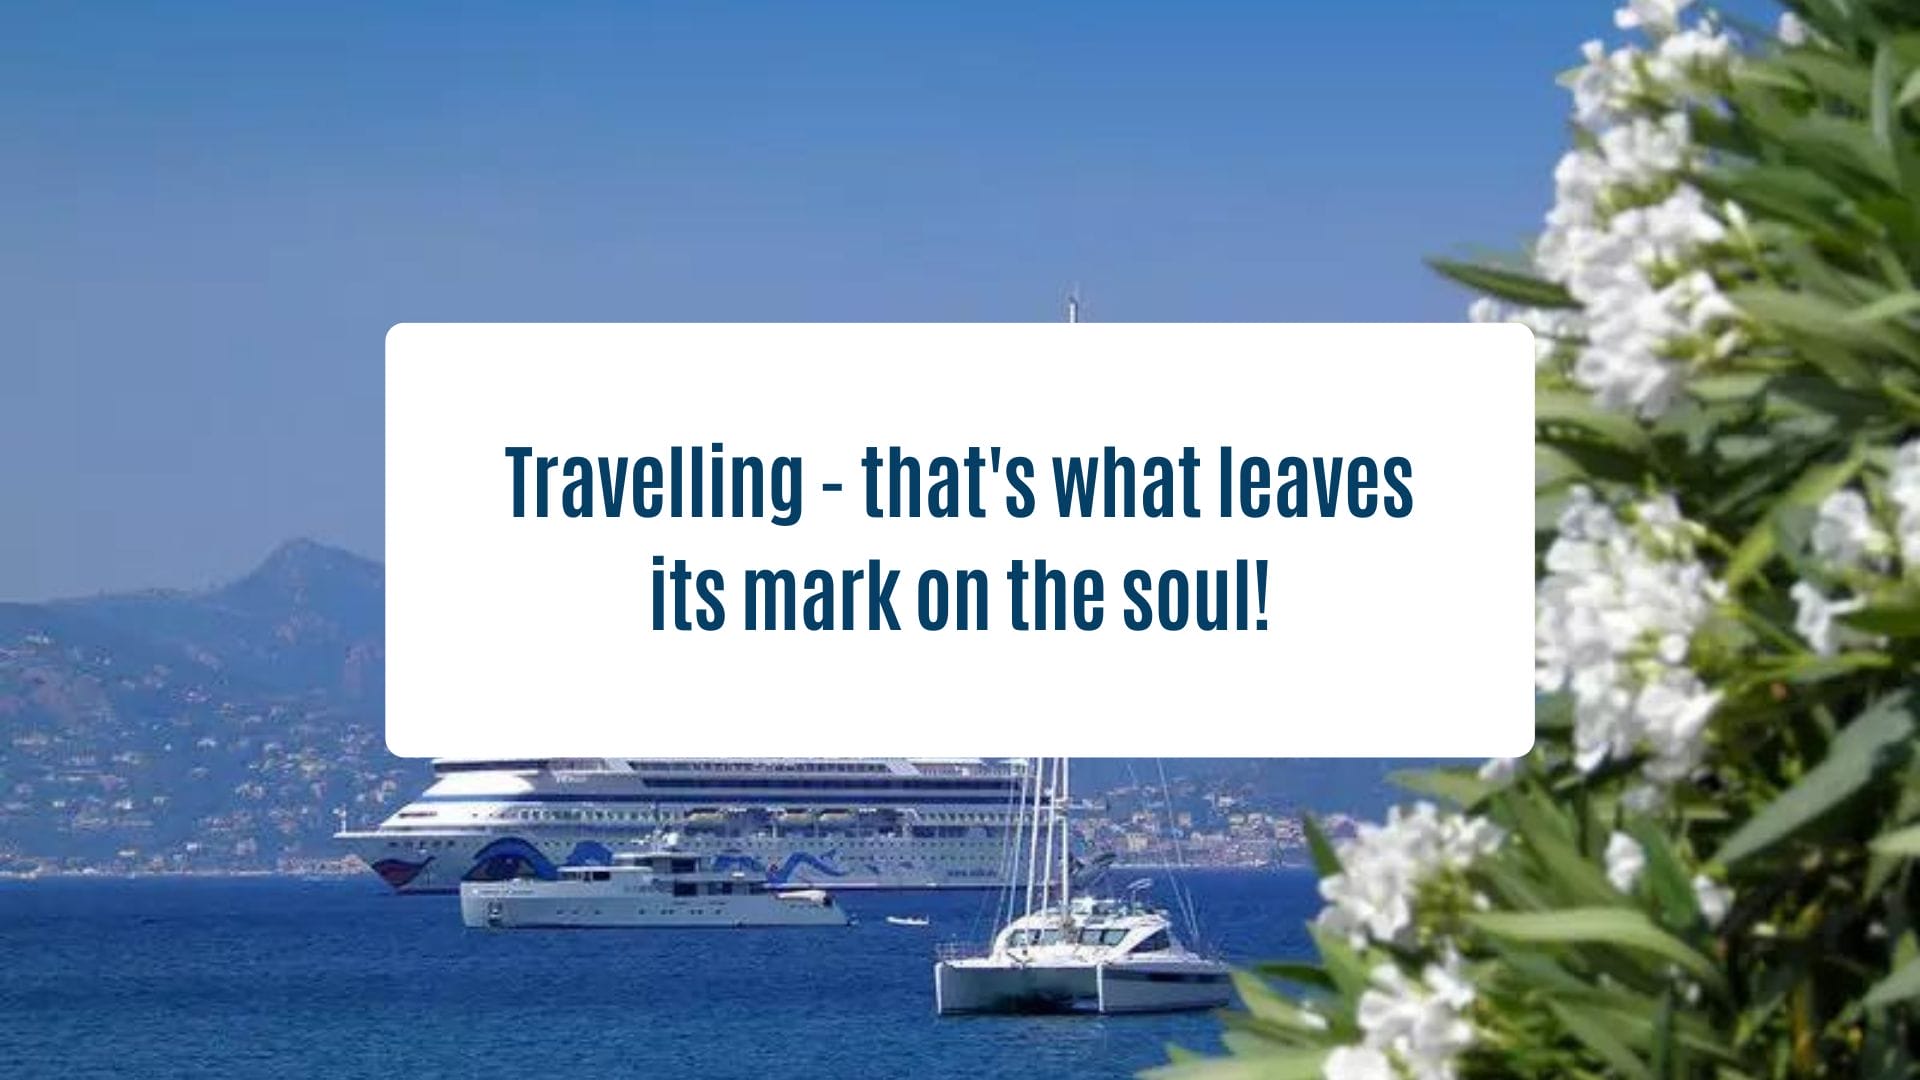 News Olam Properties - Travelling - that's what leaves its mark on the soul!